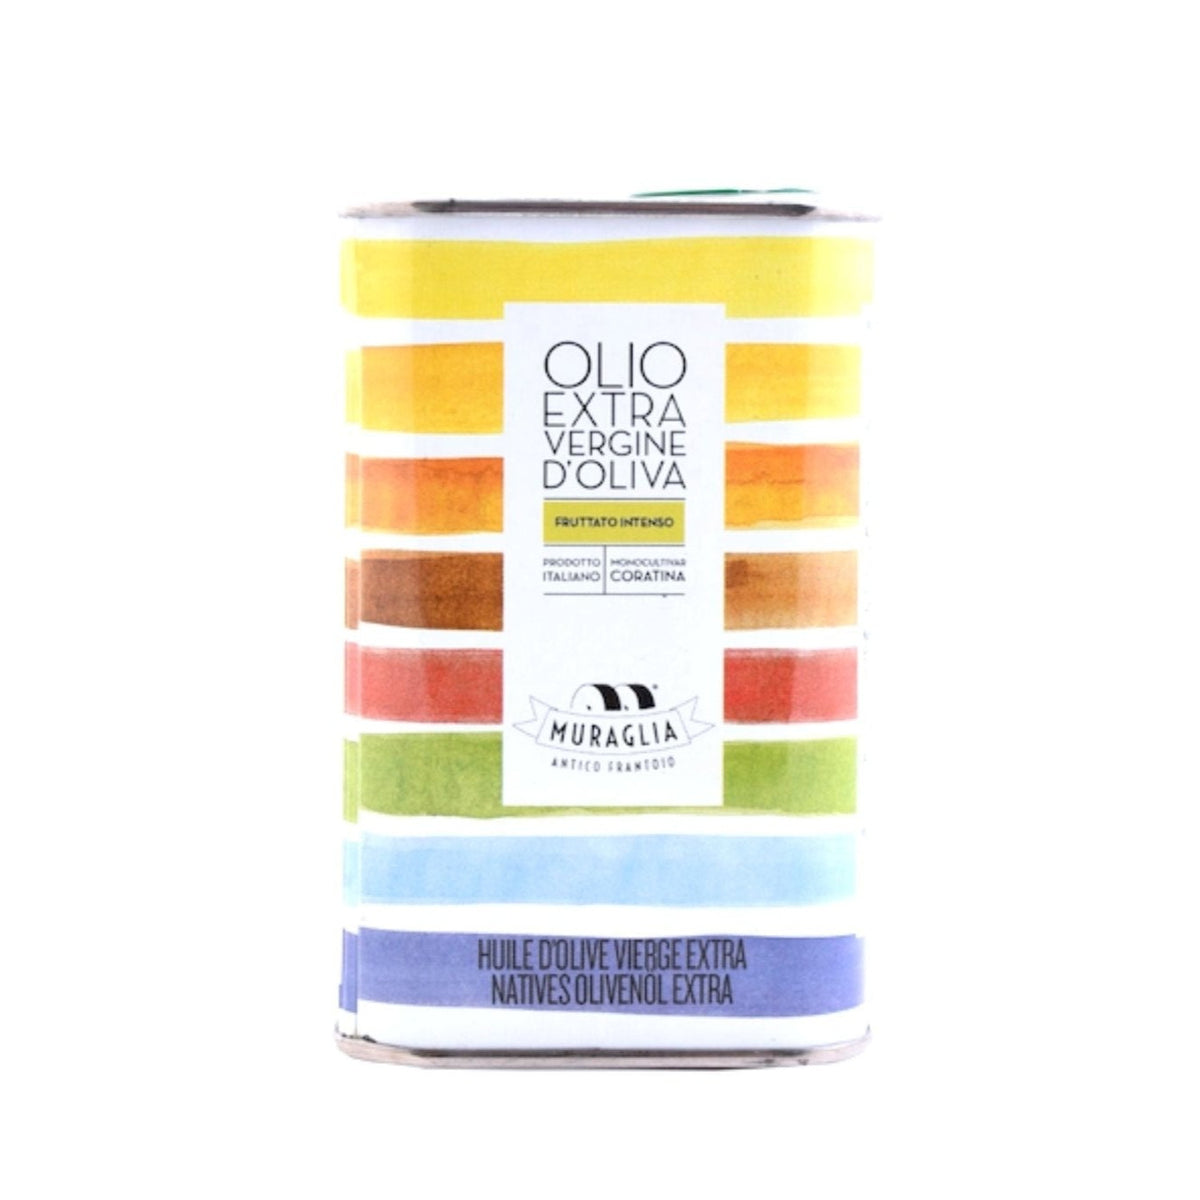 Frantoio Muraglia Rainbow Tin Intense Fruity Coratina Extra Virgin Olive Oil 250ml  | Imported and distributed in the UK by Just Gourmet Foods